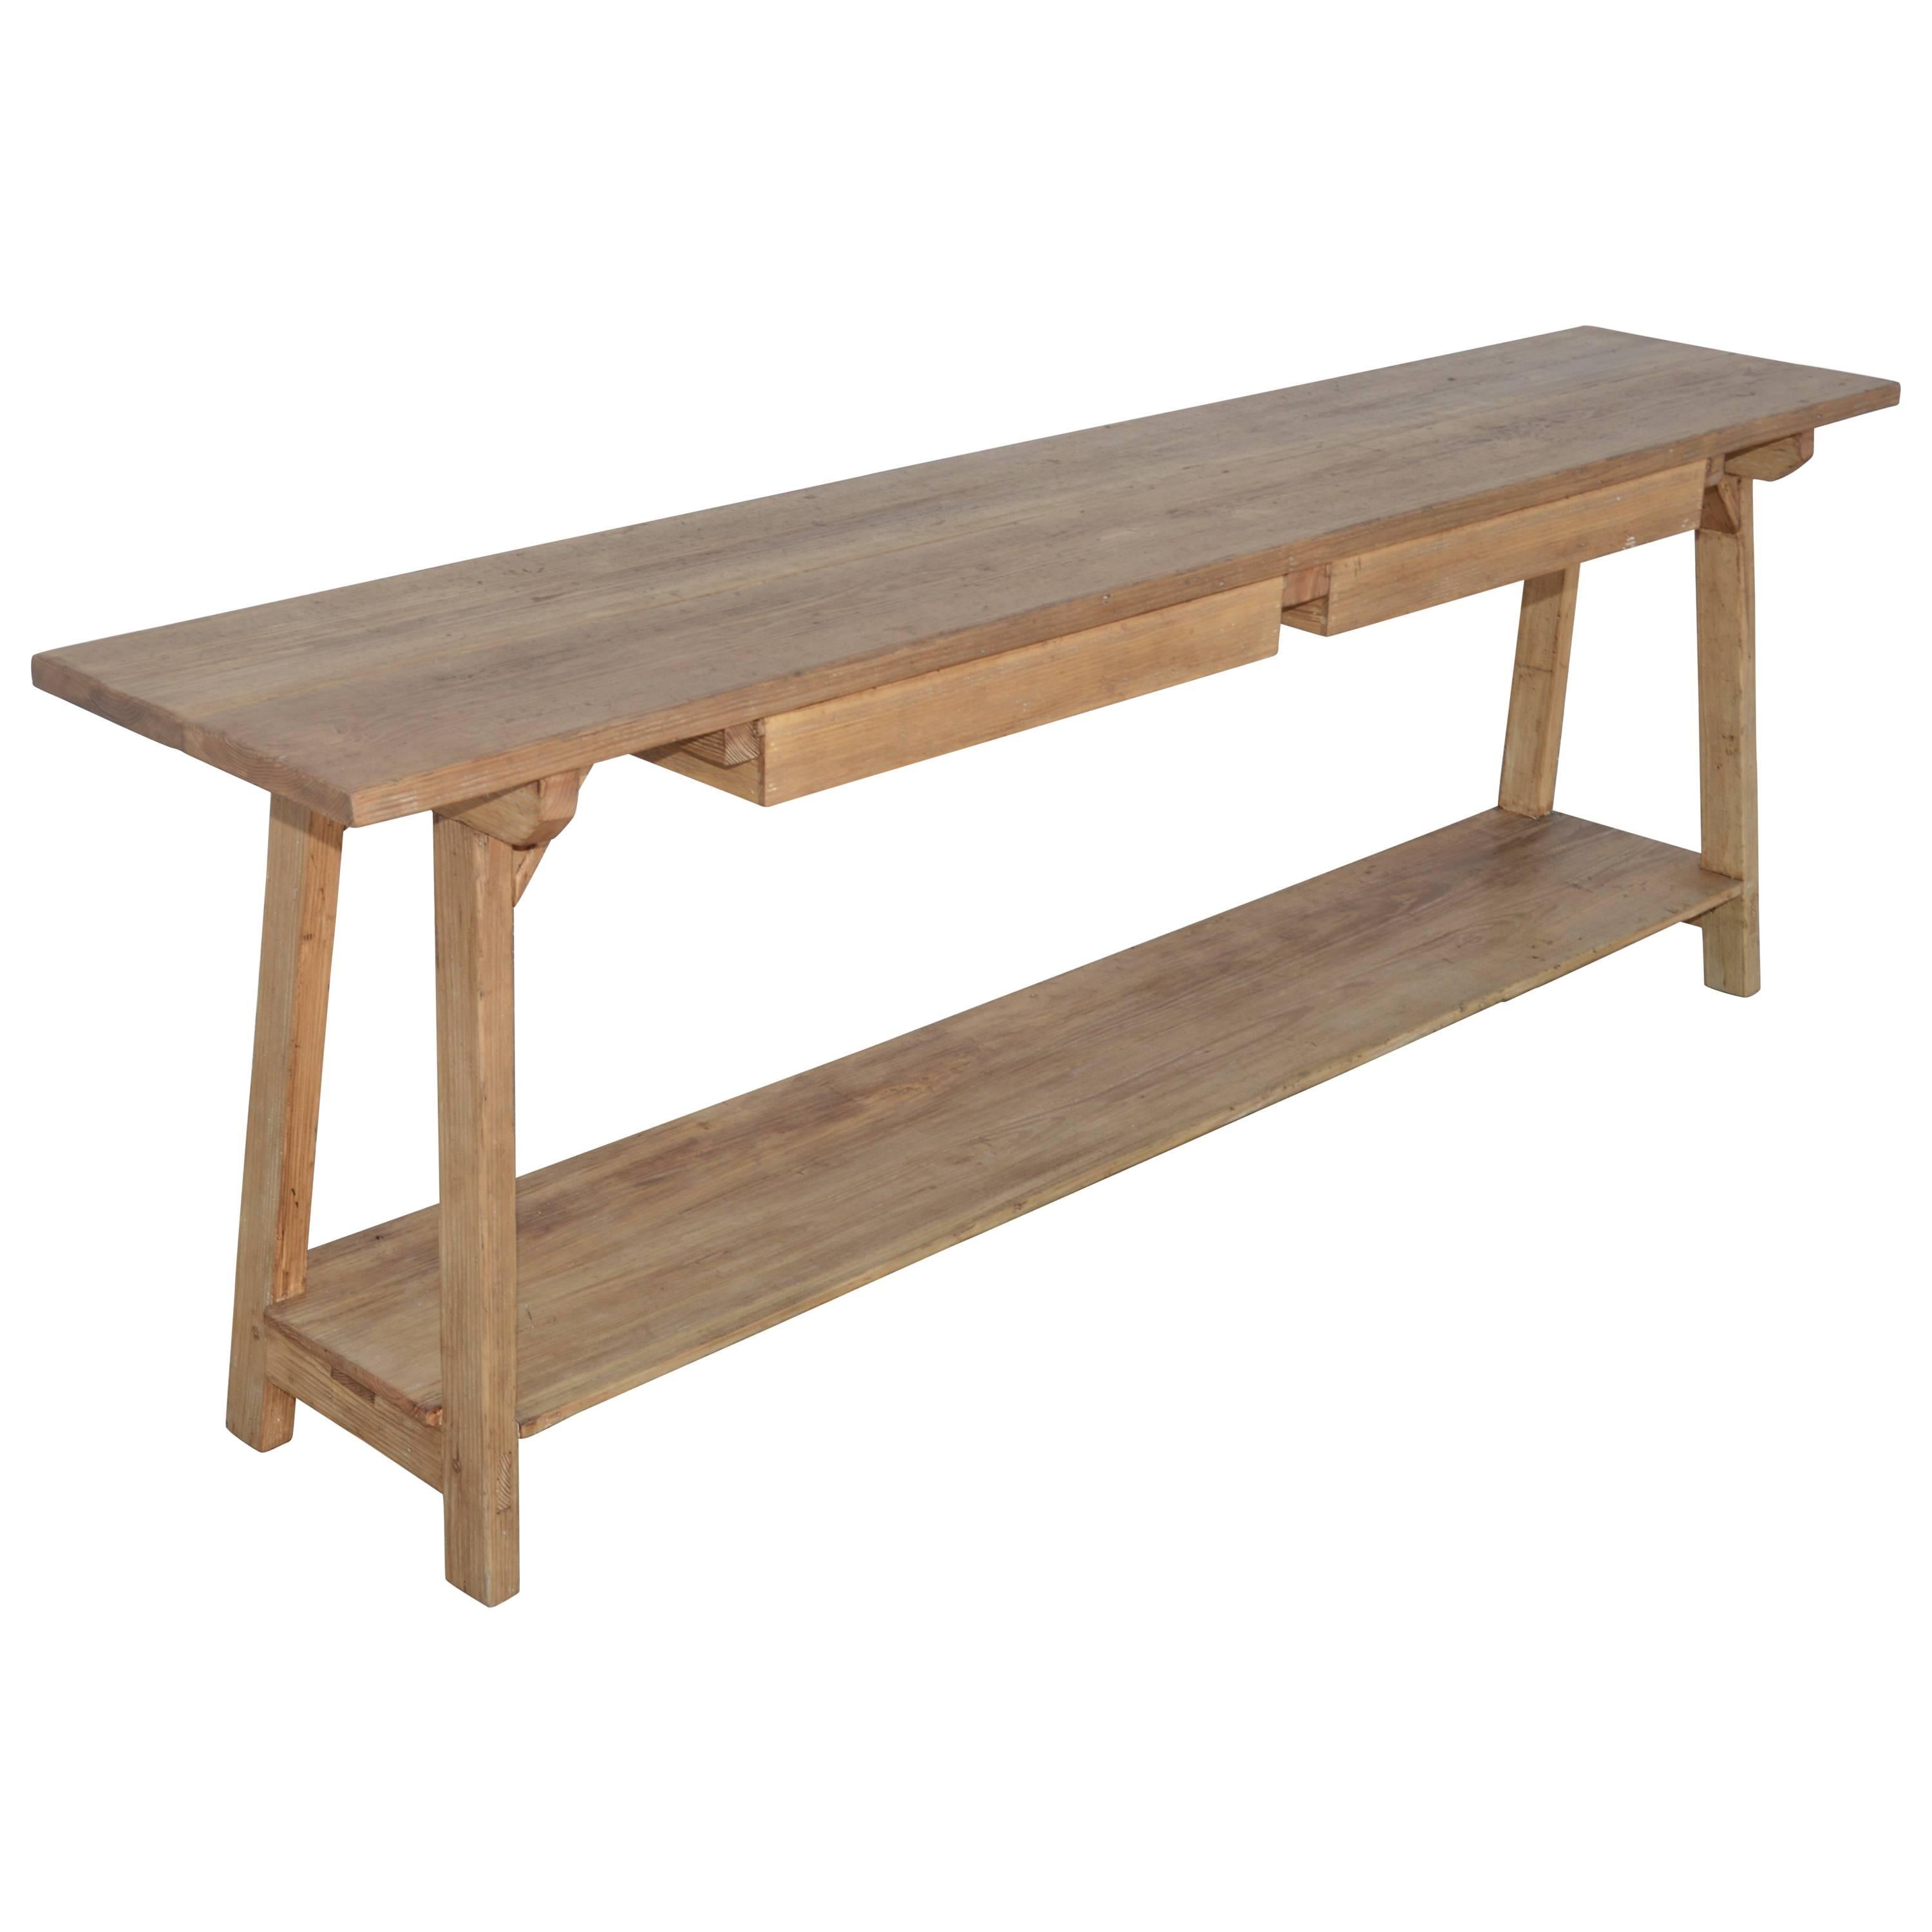 AgathaConsole Table in Reclaimed Heart-Pine, Built to Order by Petersen Antiques